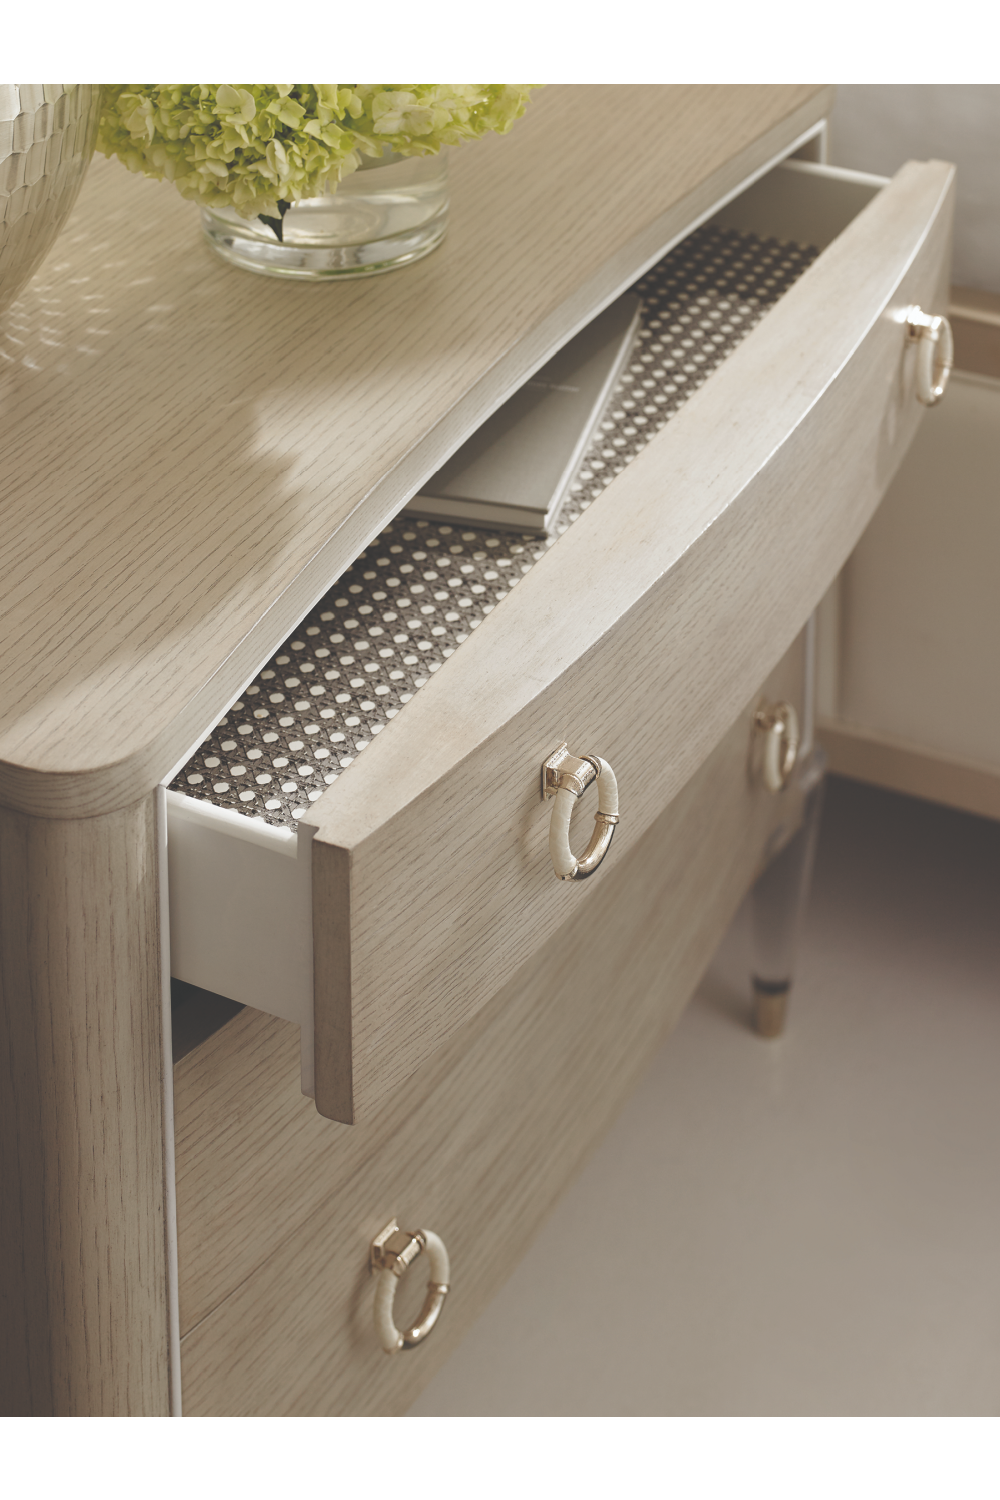 Light Gray Modern Nightstand | Caracole Floating On Air | Oroa.com